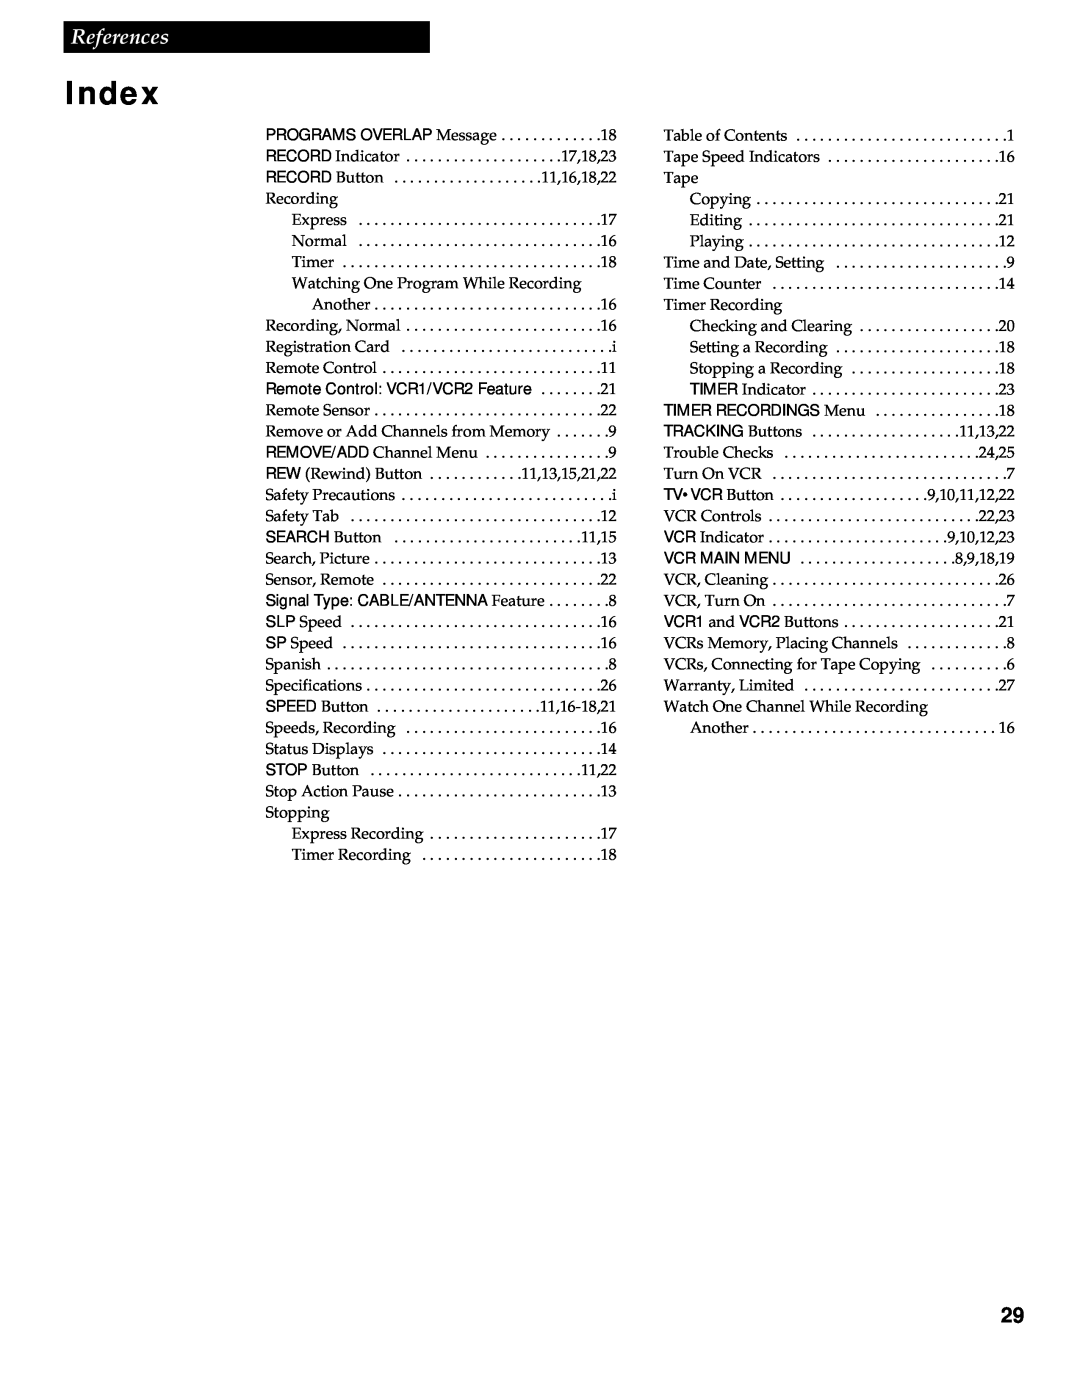 RCA VR336 manual Index, References, Table of Contents 